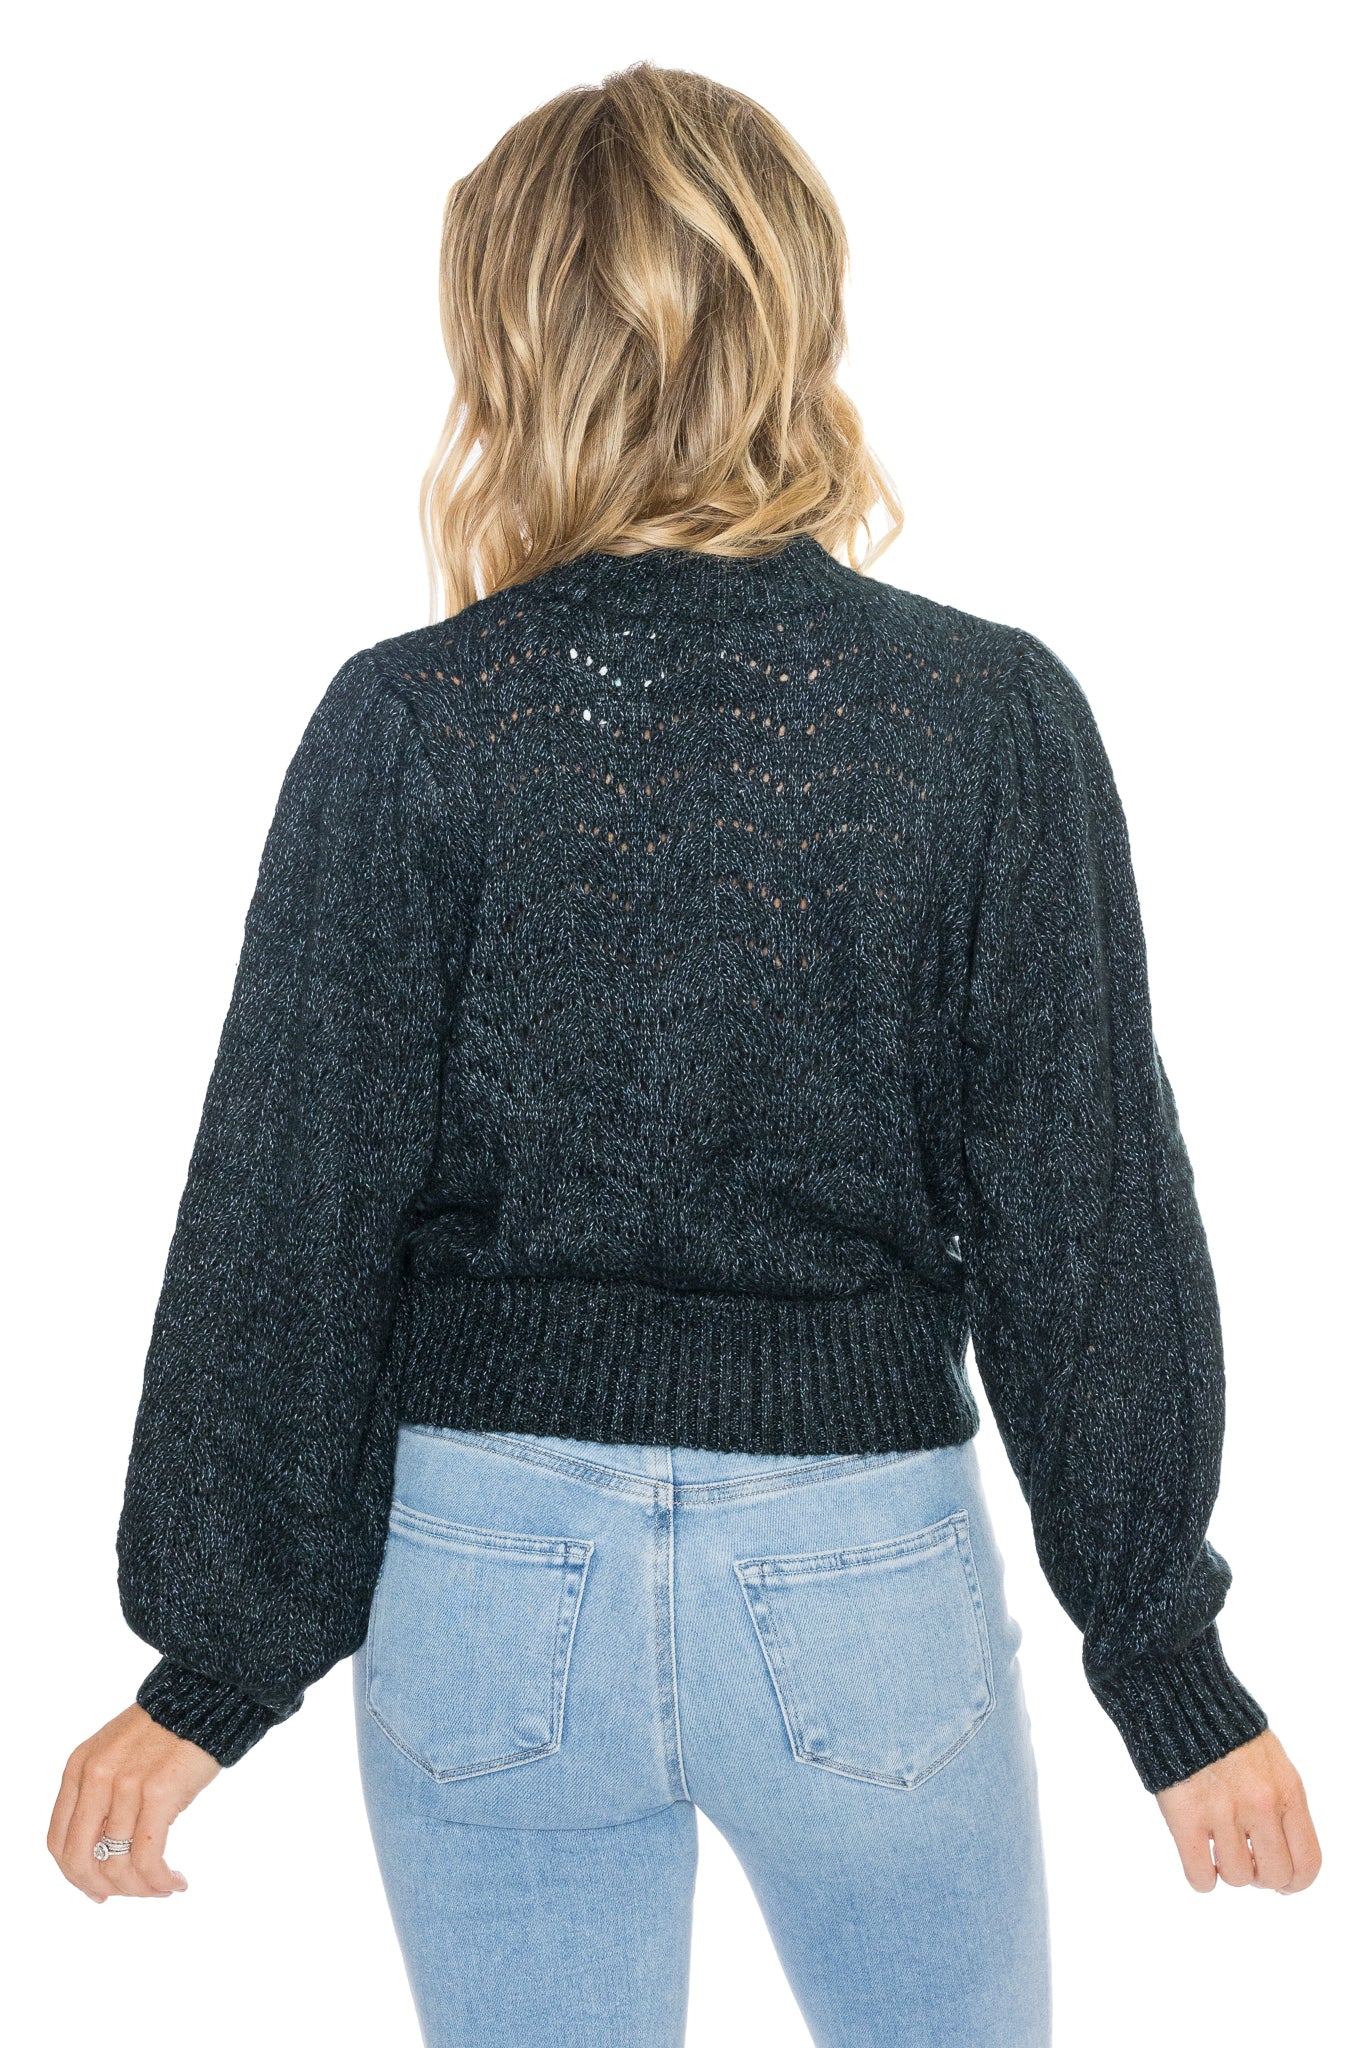 Livia Sweater by Gentle Fawn